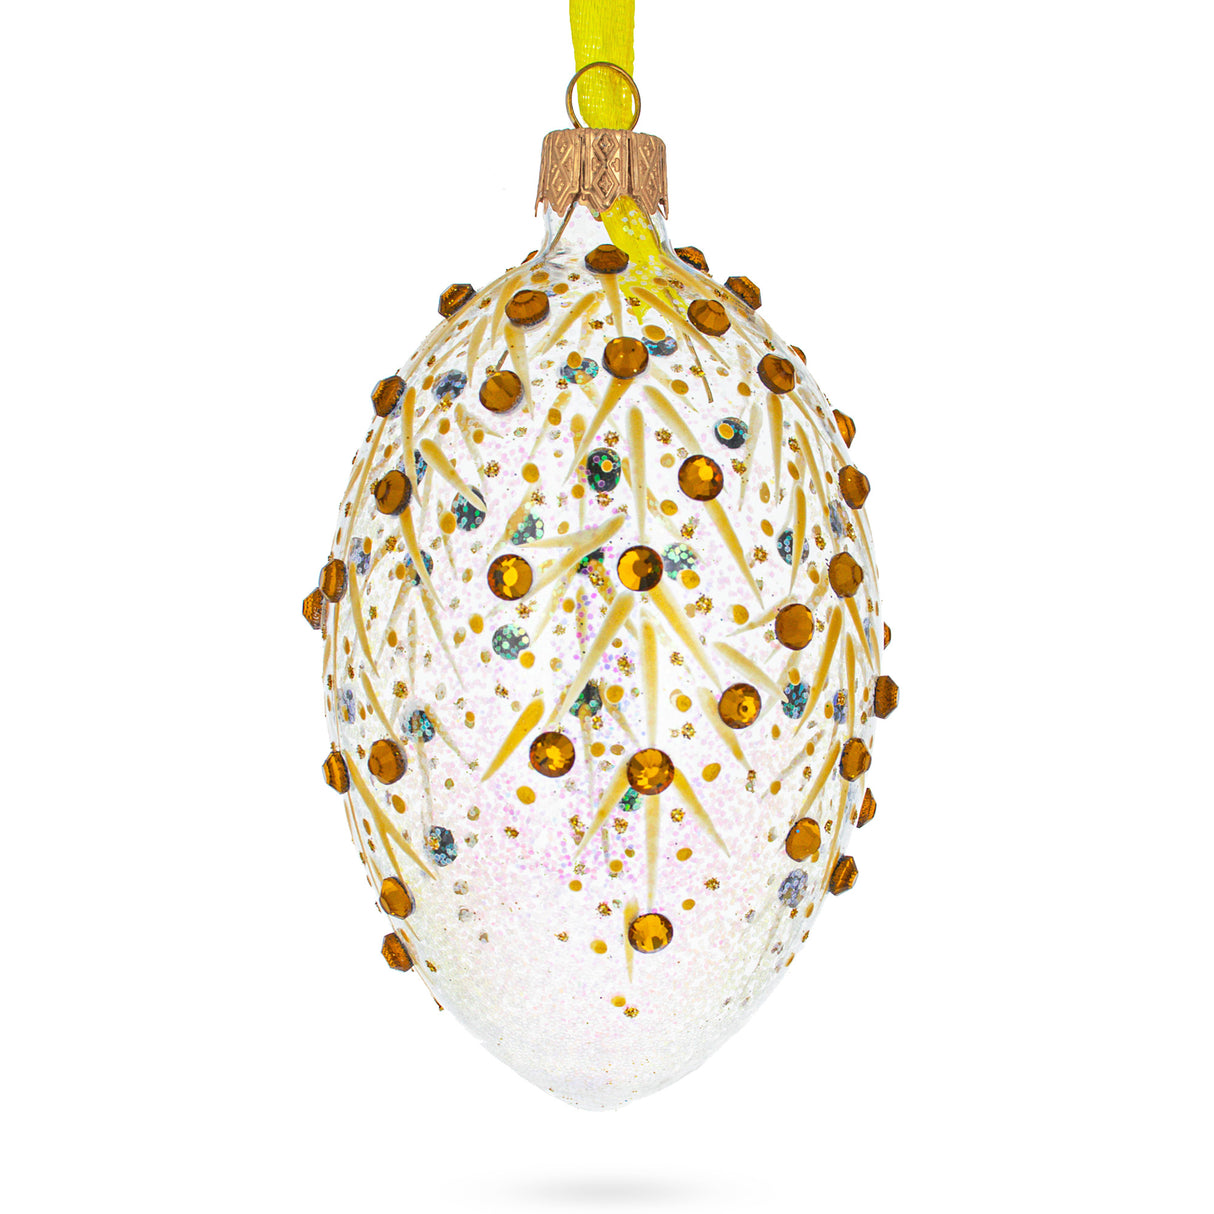 Gold Branches Glass Egg Christmas Ornament 4 Inches in Gold color, Oval shape